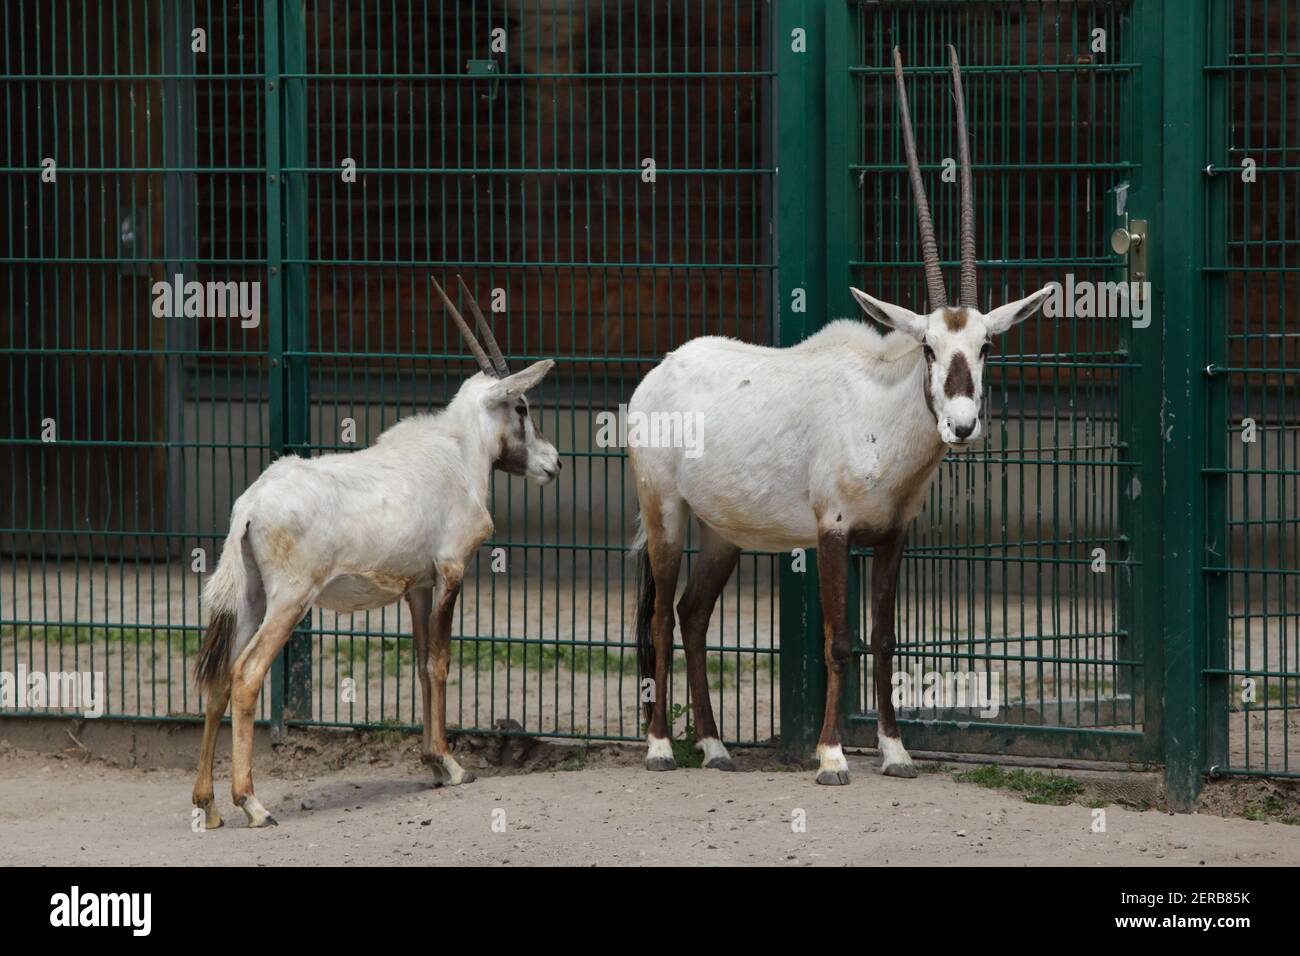 Arabian oryx (Oryx leucoryx), also known as the white oryx at Tierpark Berlin in Berlin, Germany. Stock Photo